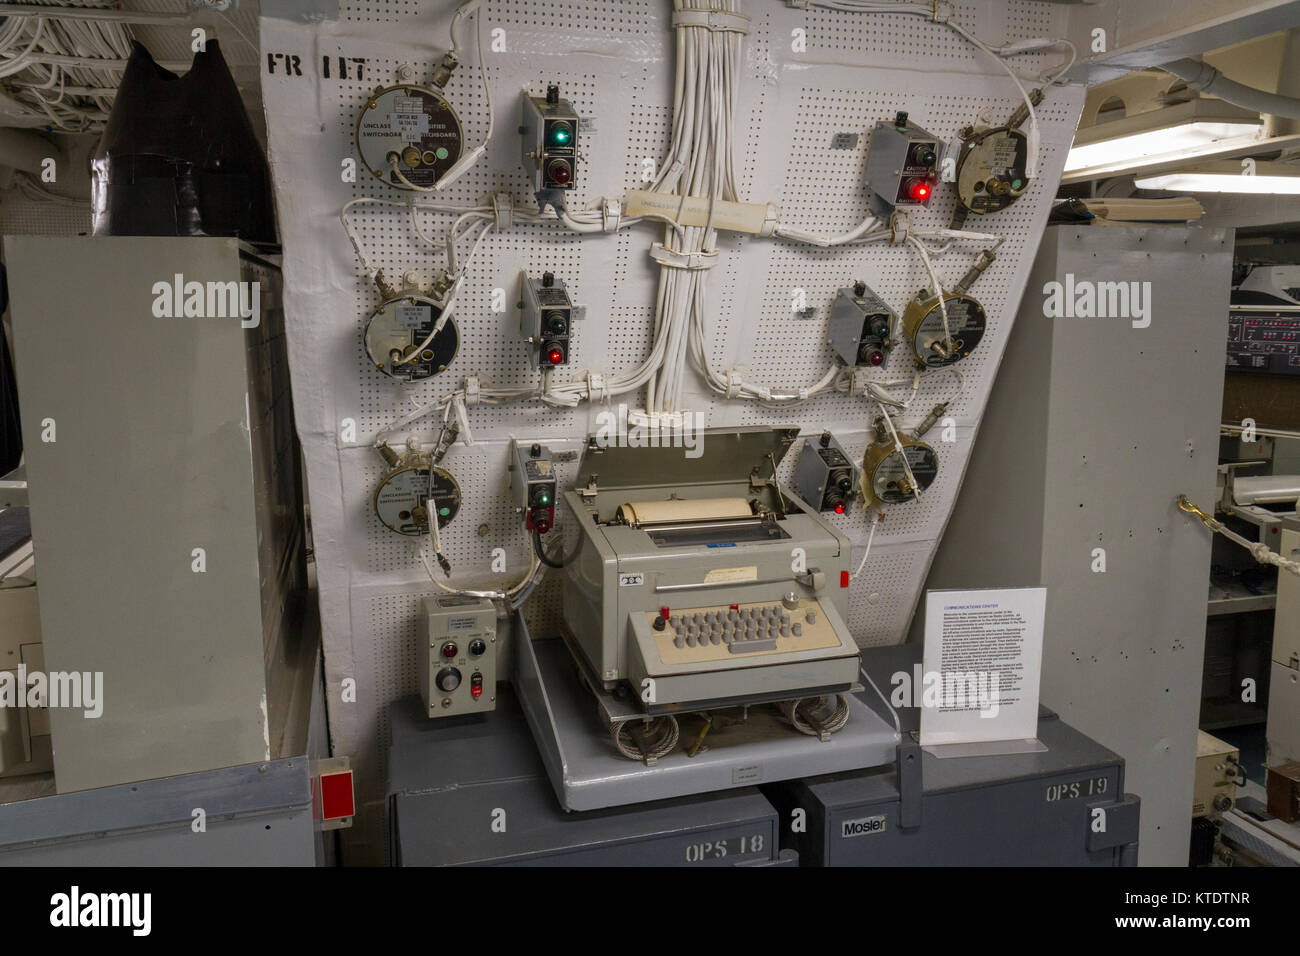 Equipment inside the radio room on the USS New Jersey Iowa Class Battleship, Delaware River, New Jersey, United States. Stock Photo